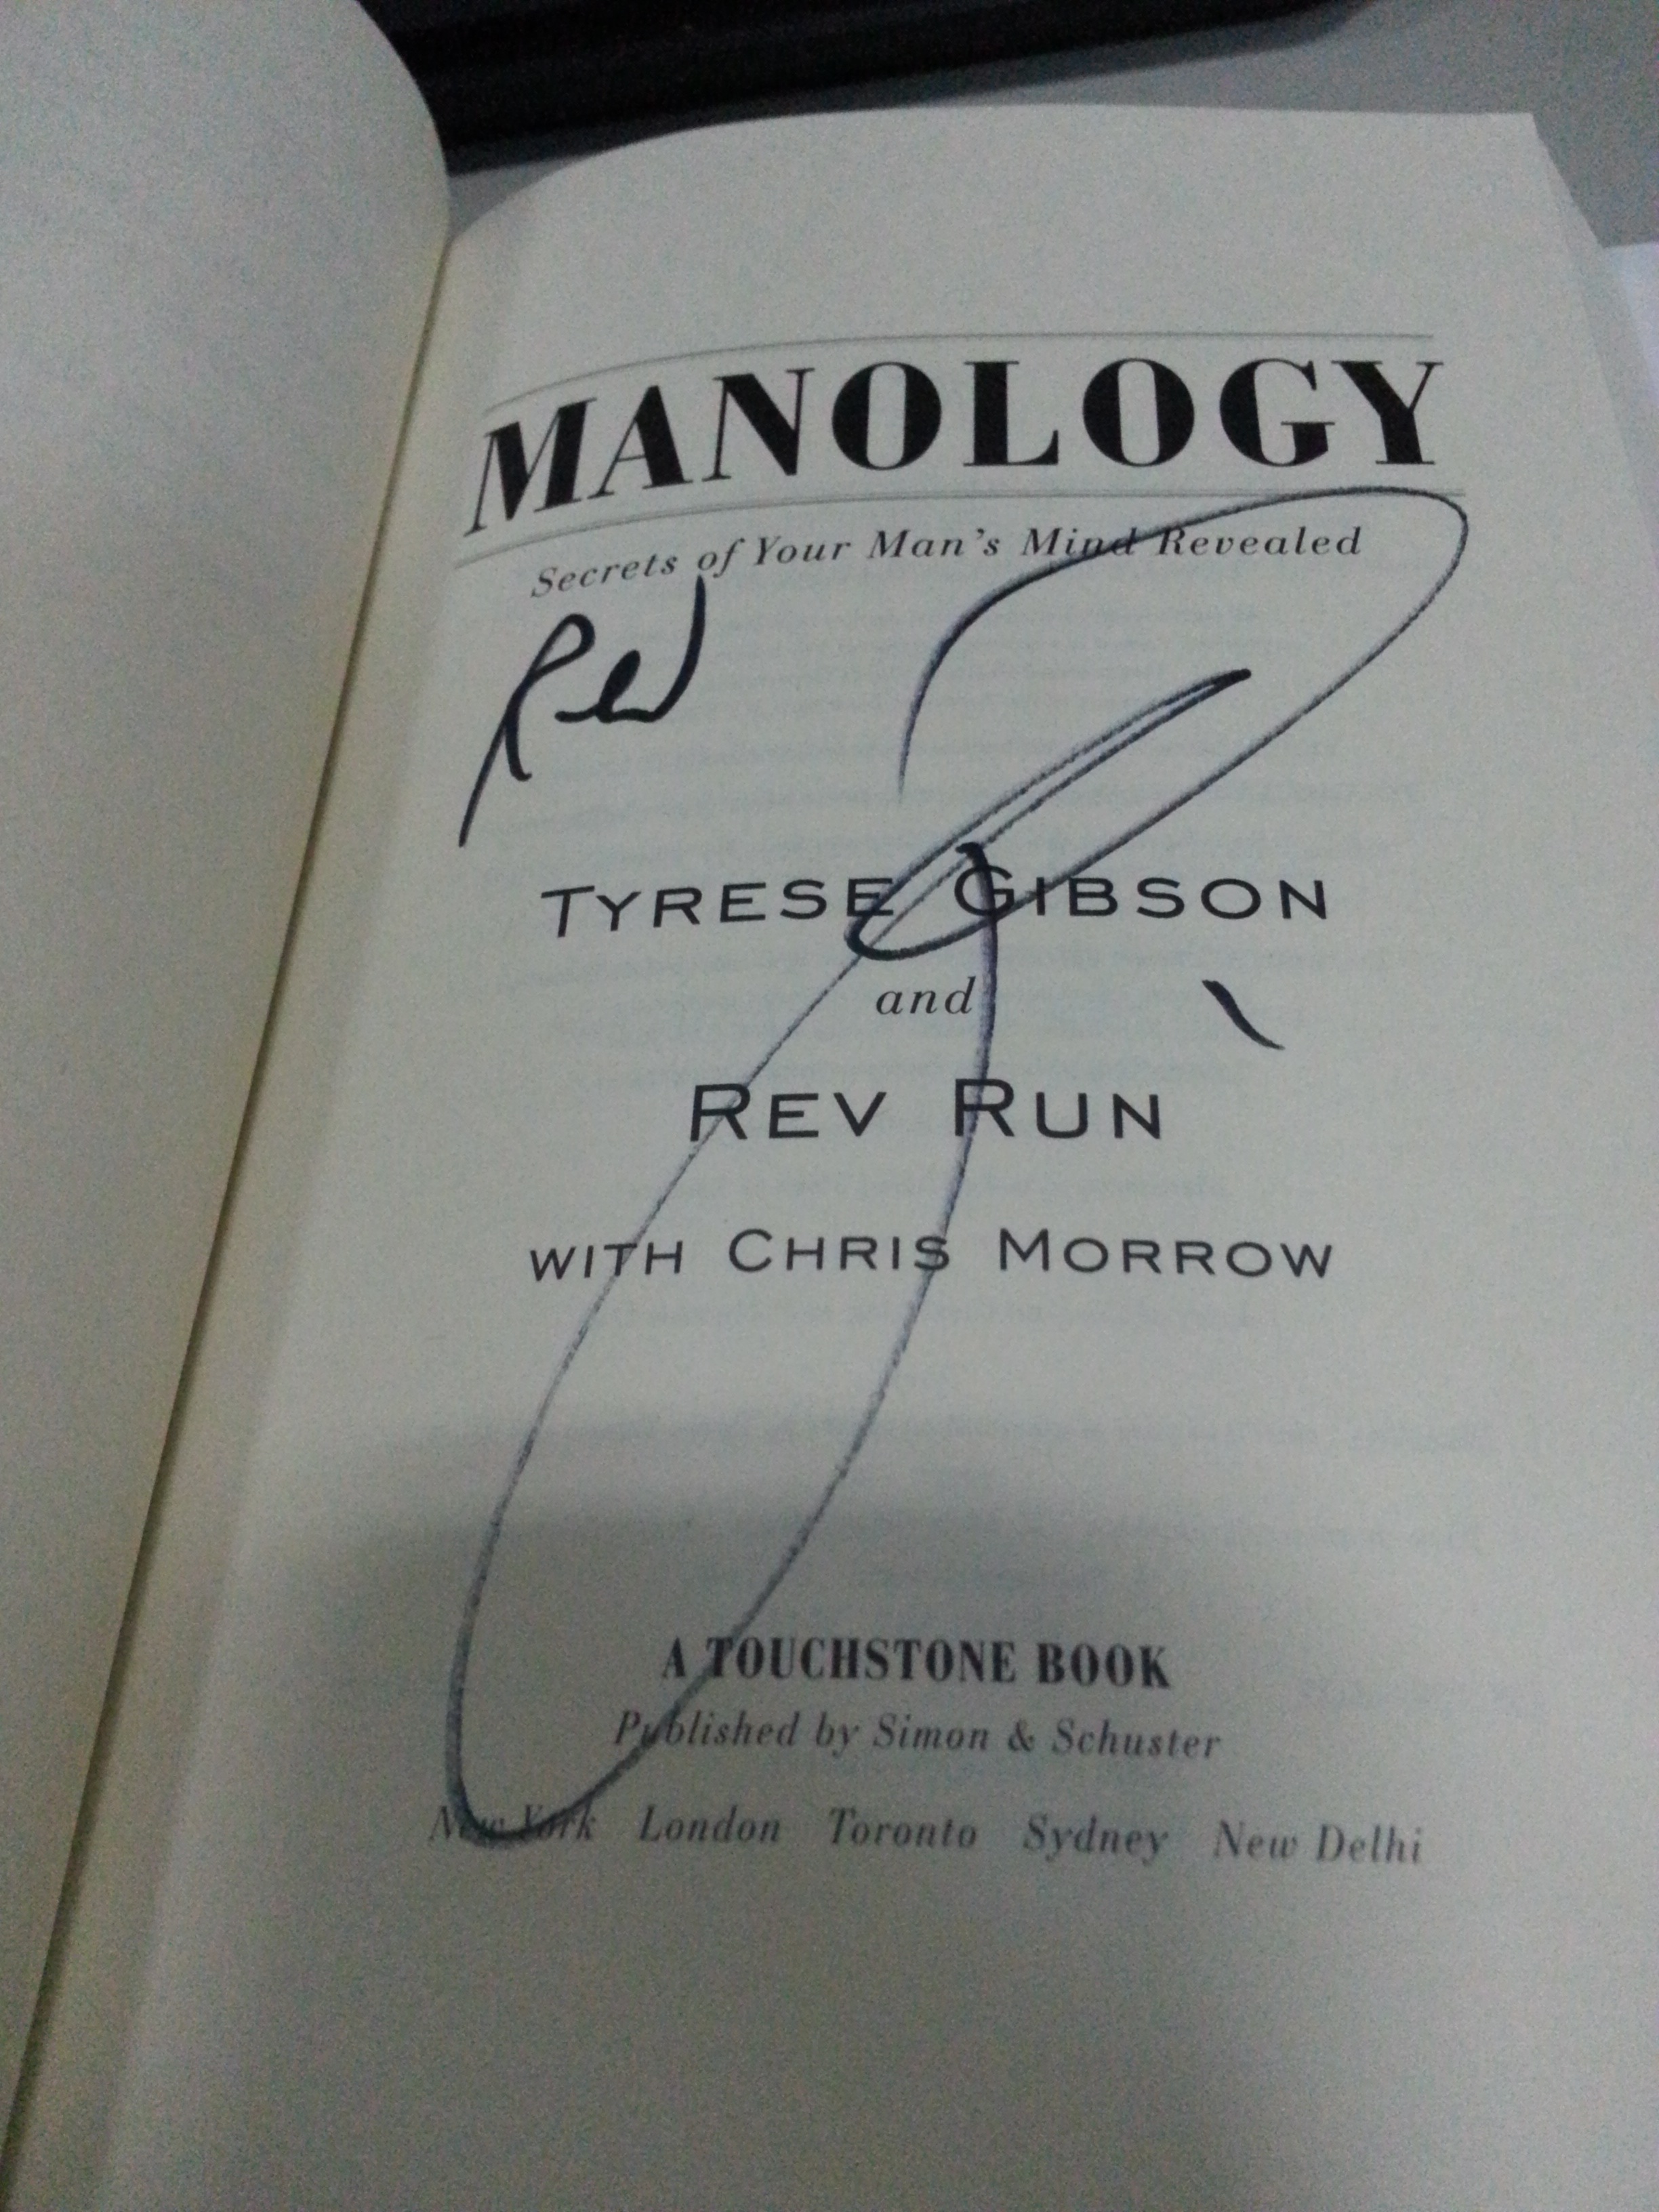 Manology Secrets of Your Man's Mind Revealed by Tyrese Gibson & Rev Run